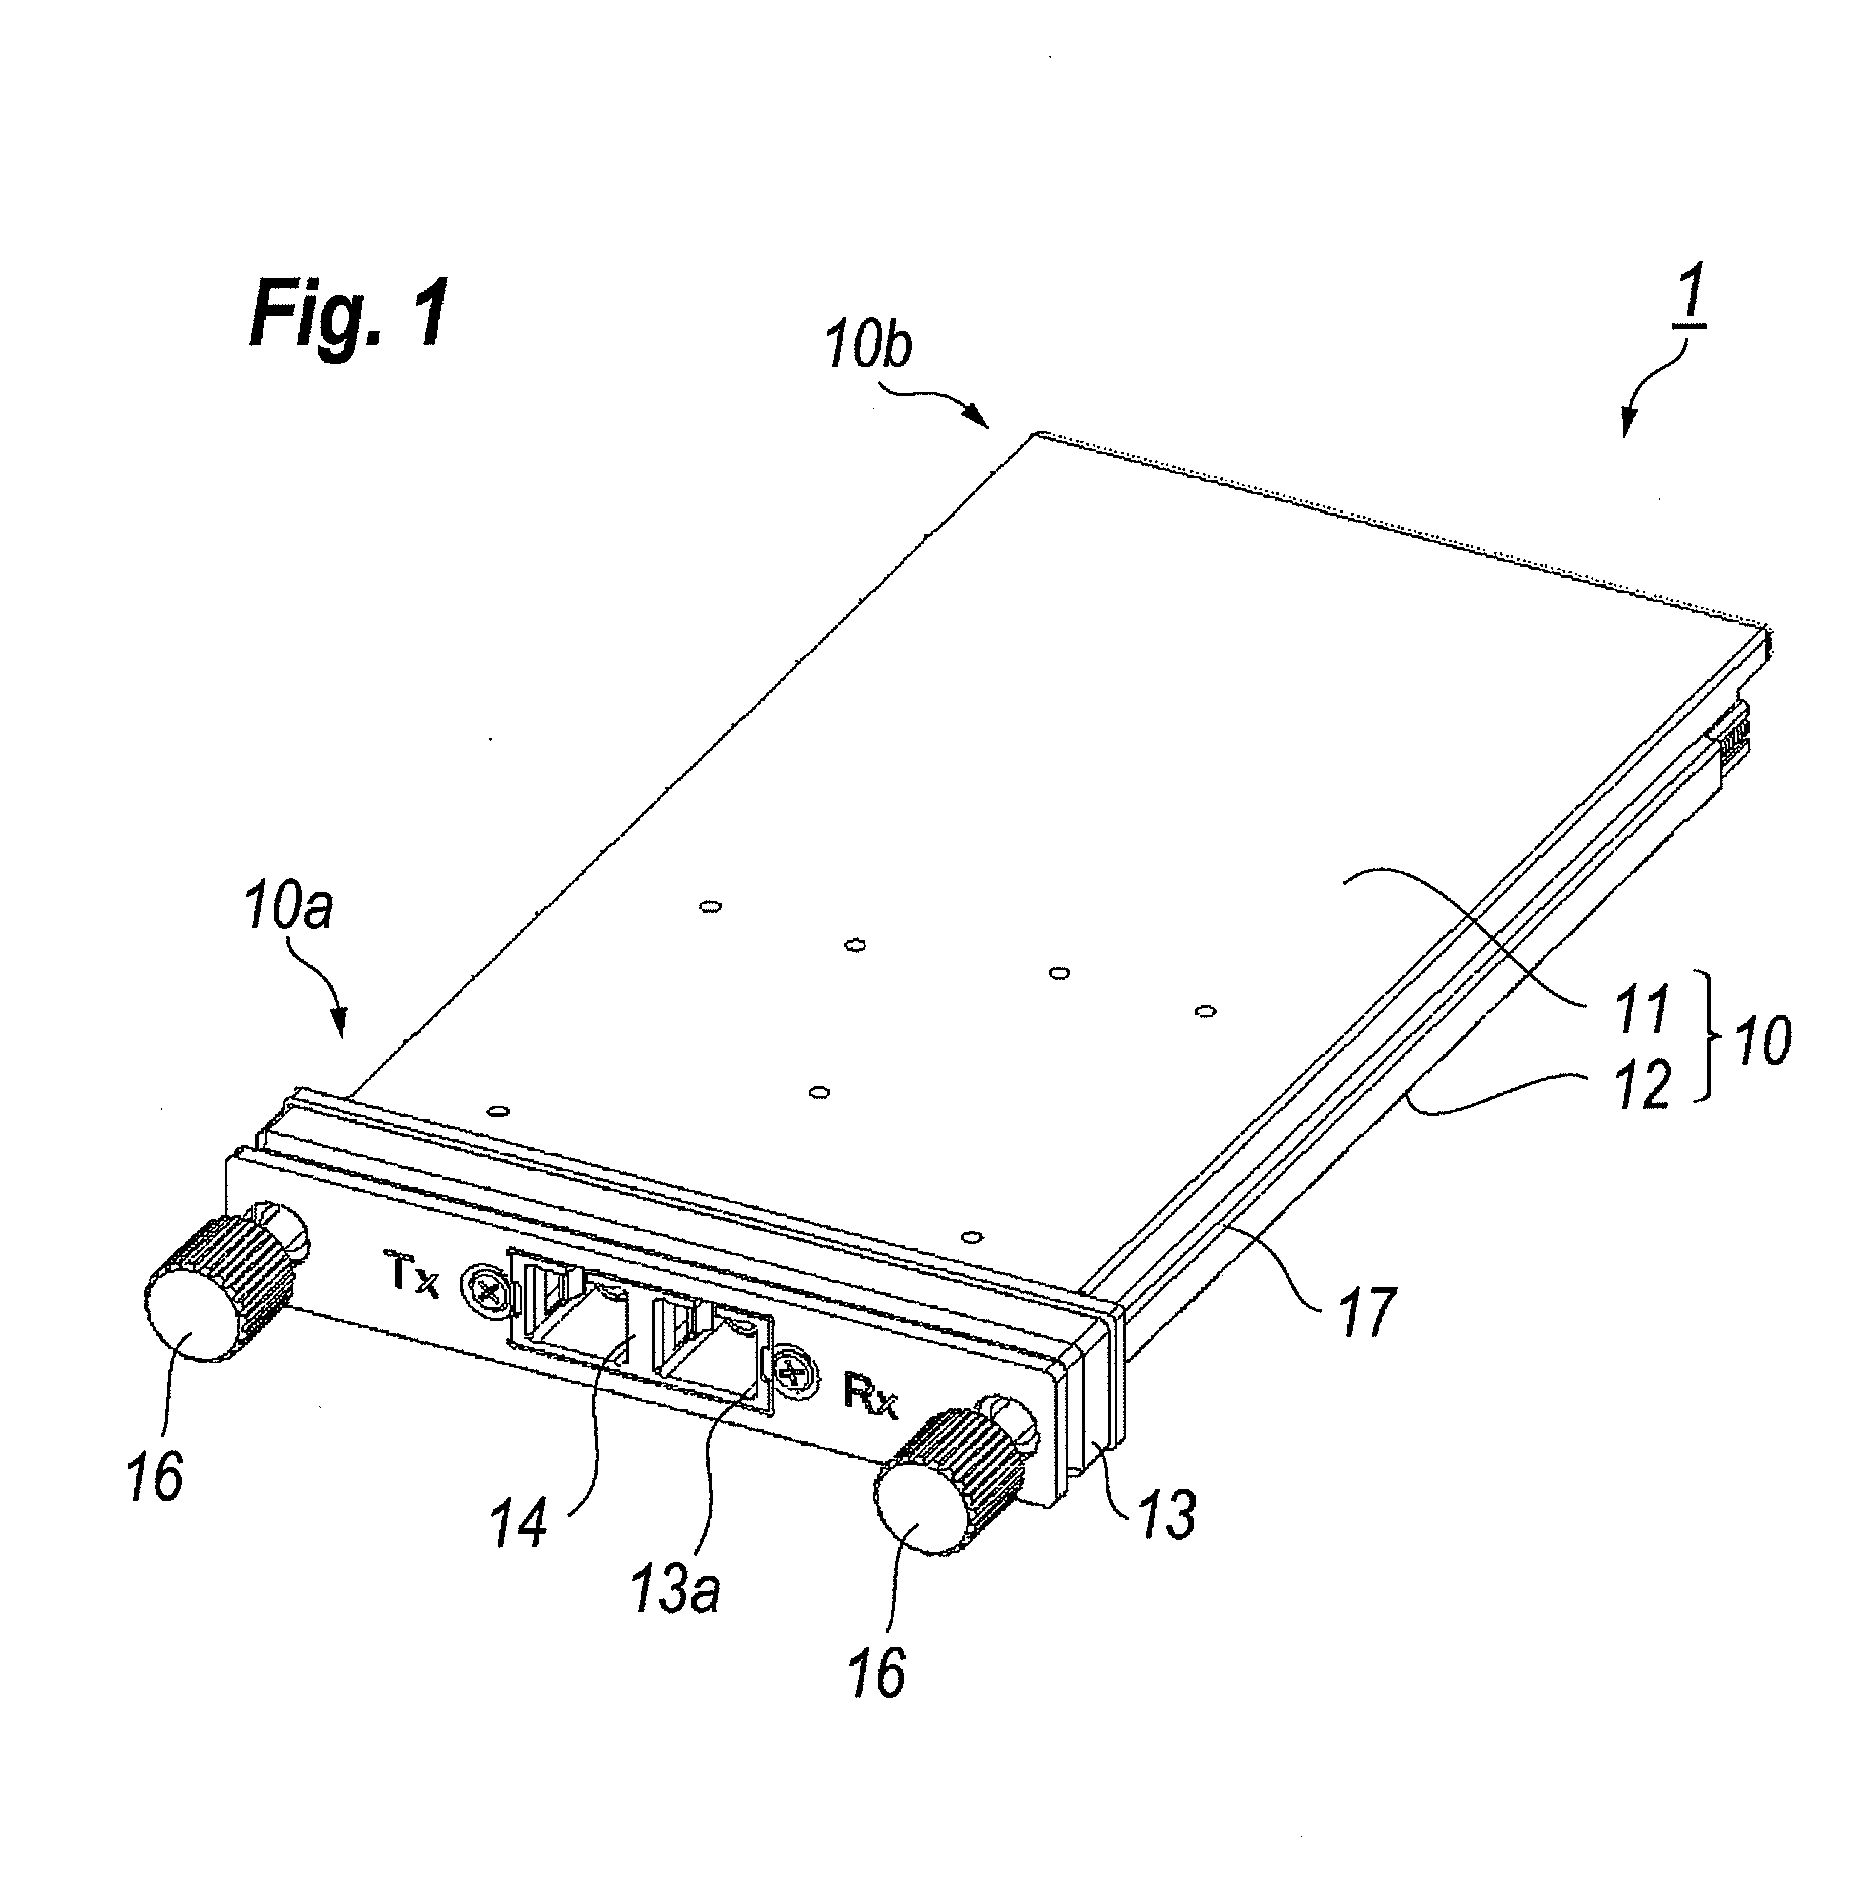 Optical transceiver with inner fiber set within tray securing thermal path from electronic device to housing